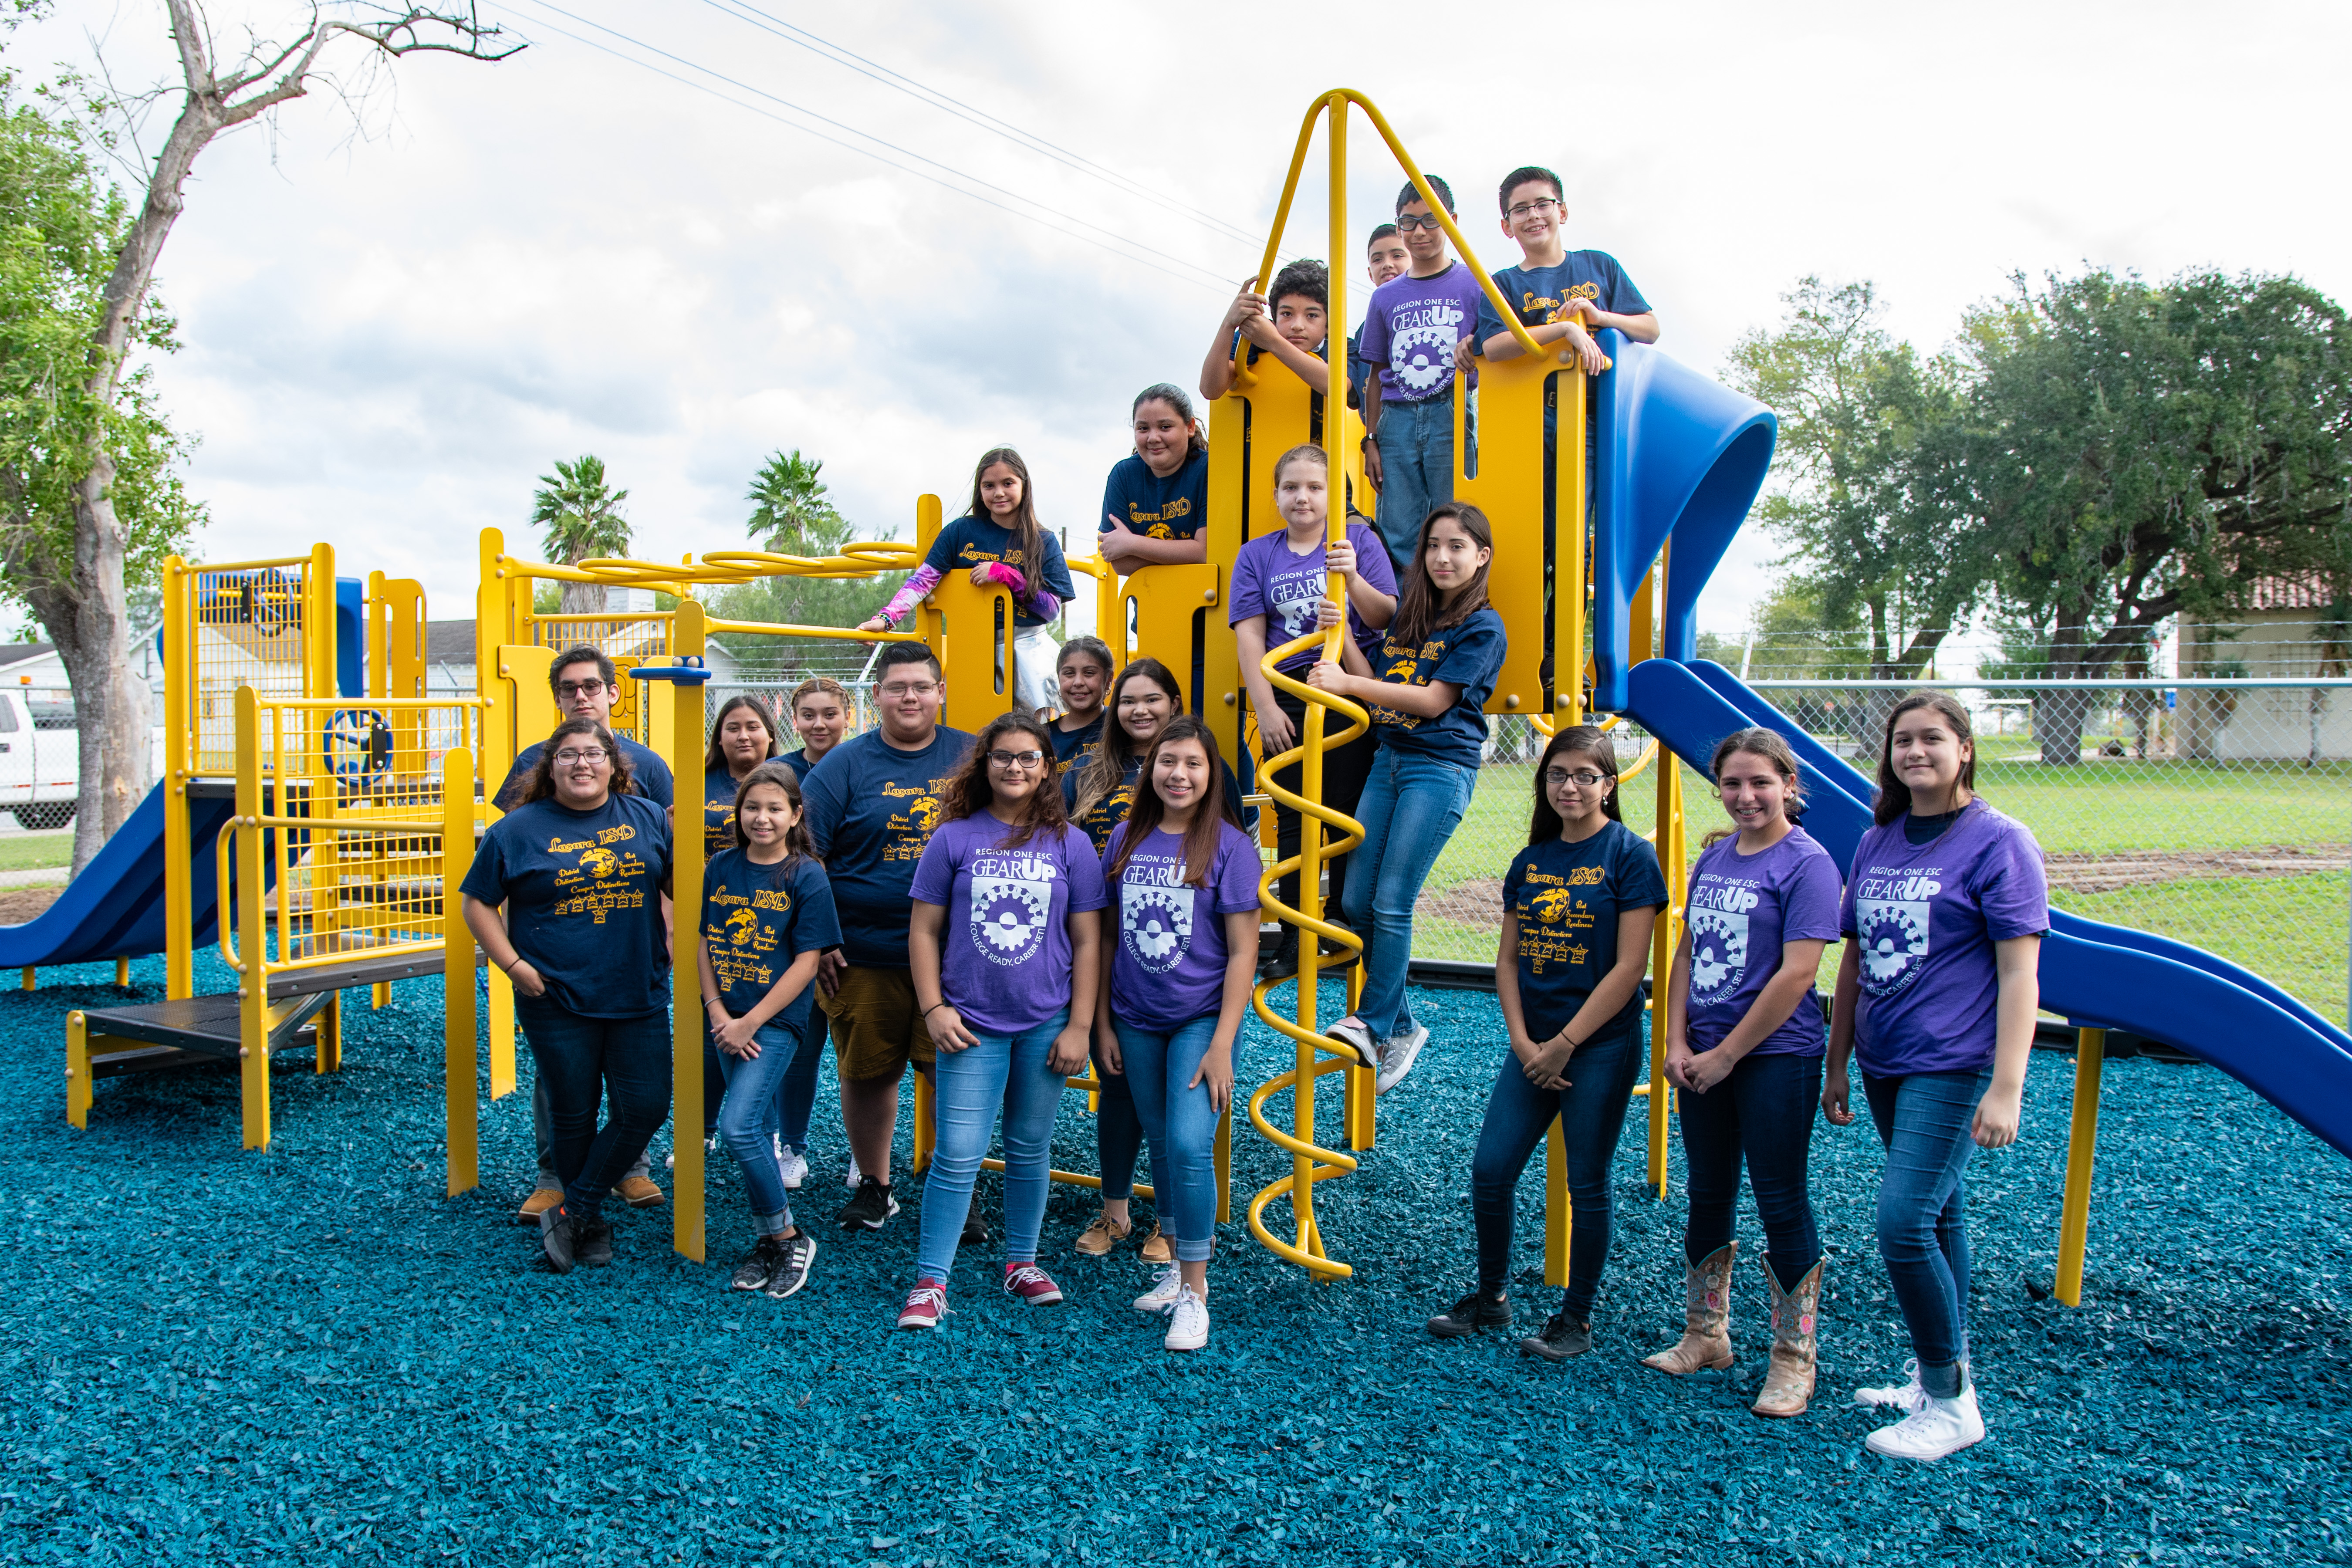 Sept. 28 ribbon cutting ceremony to celebrate completion of inclusive play  area at Felida Community Park